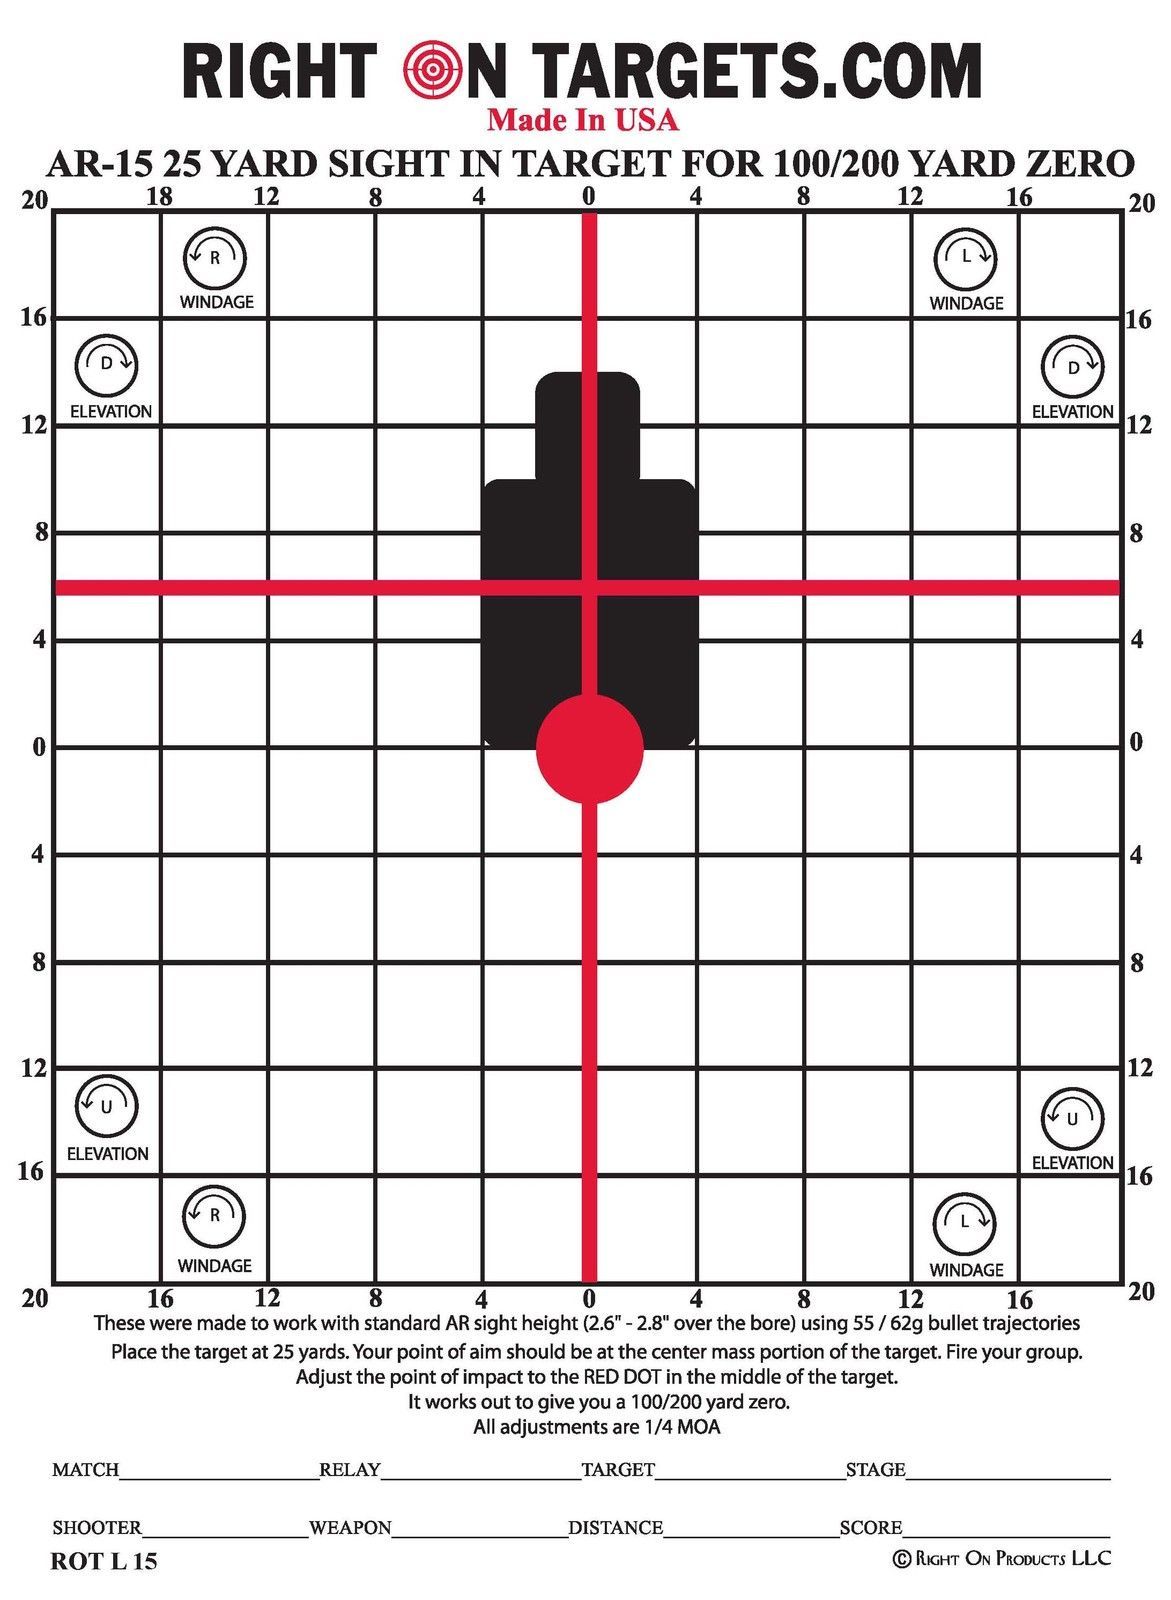 50 yard zero target pictures to pin on pinterest pinsdaddy